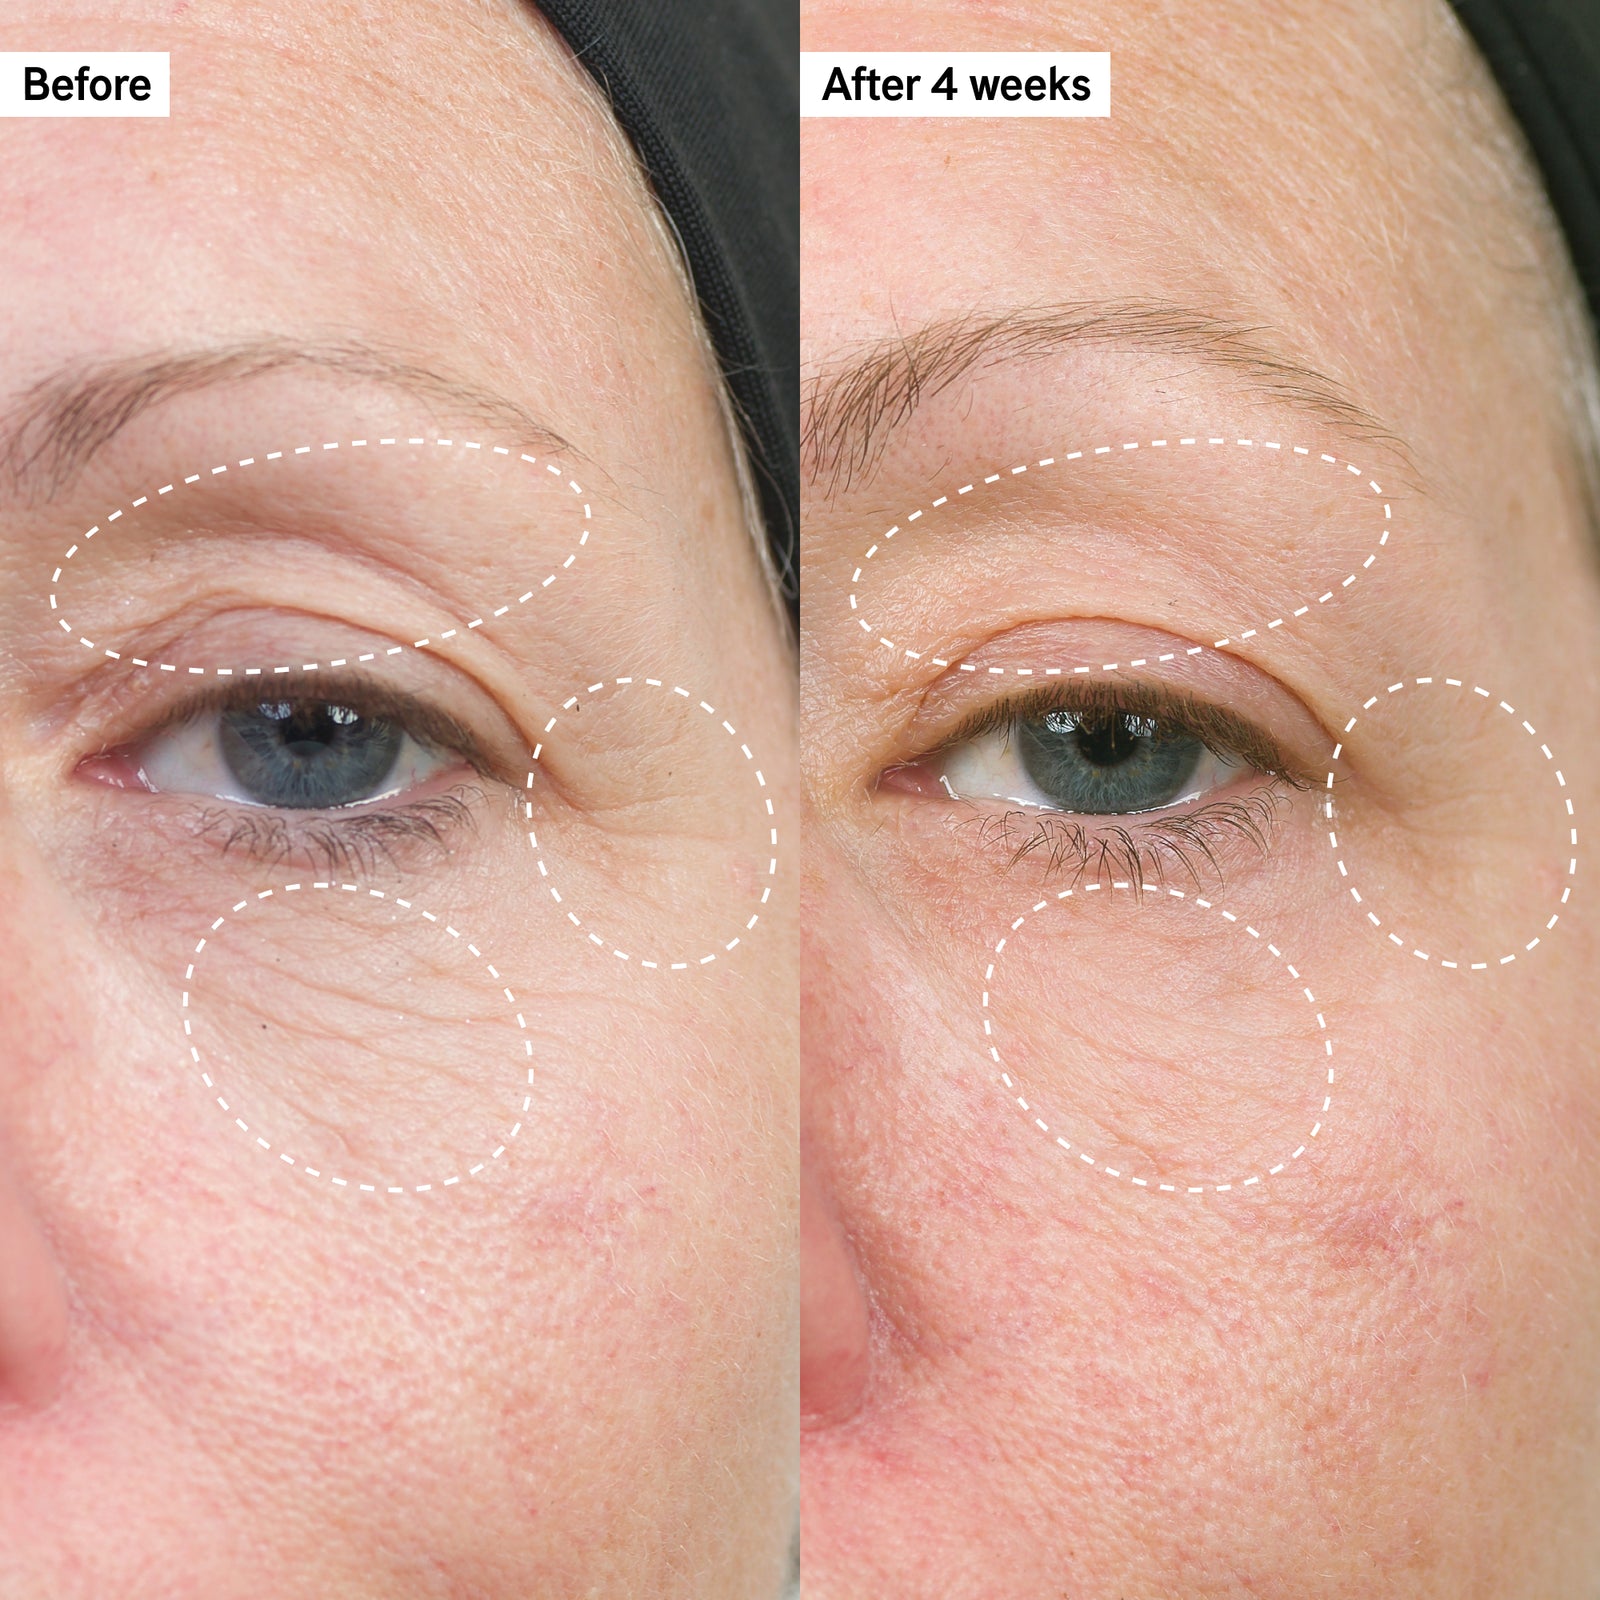 Before and after showing firmer and lifted skin on the eye